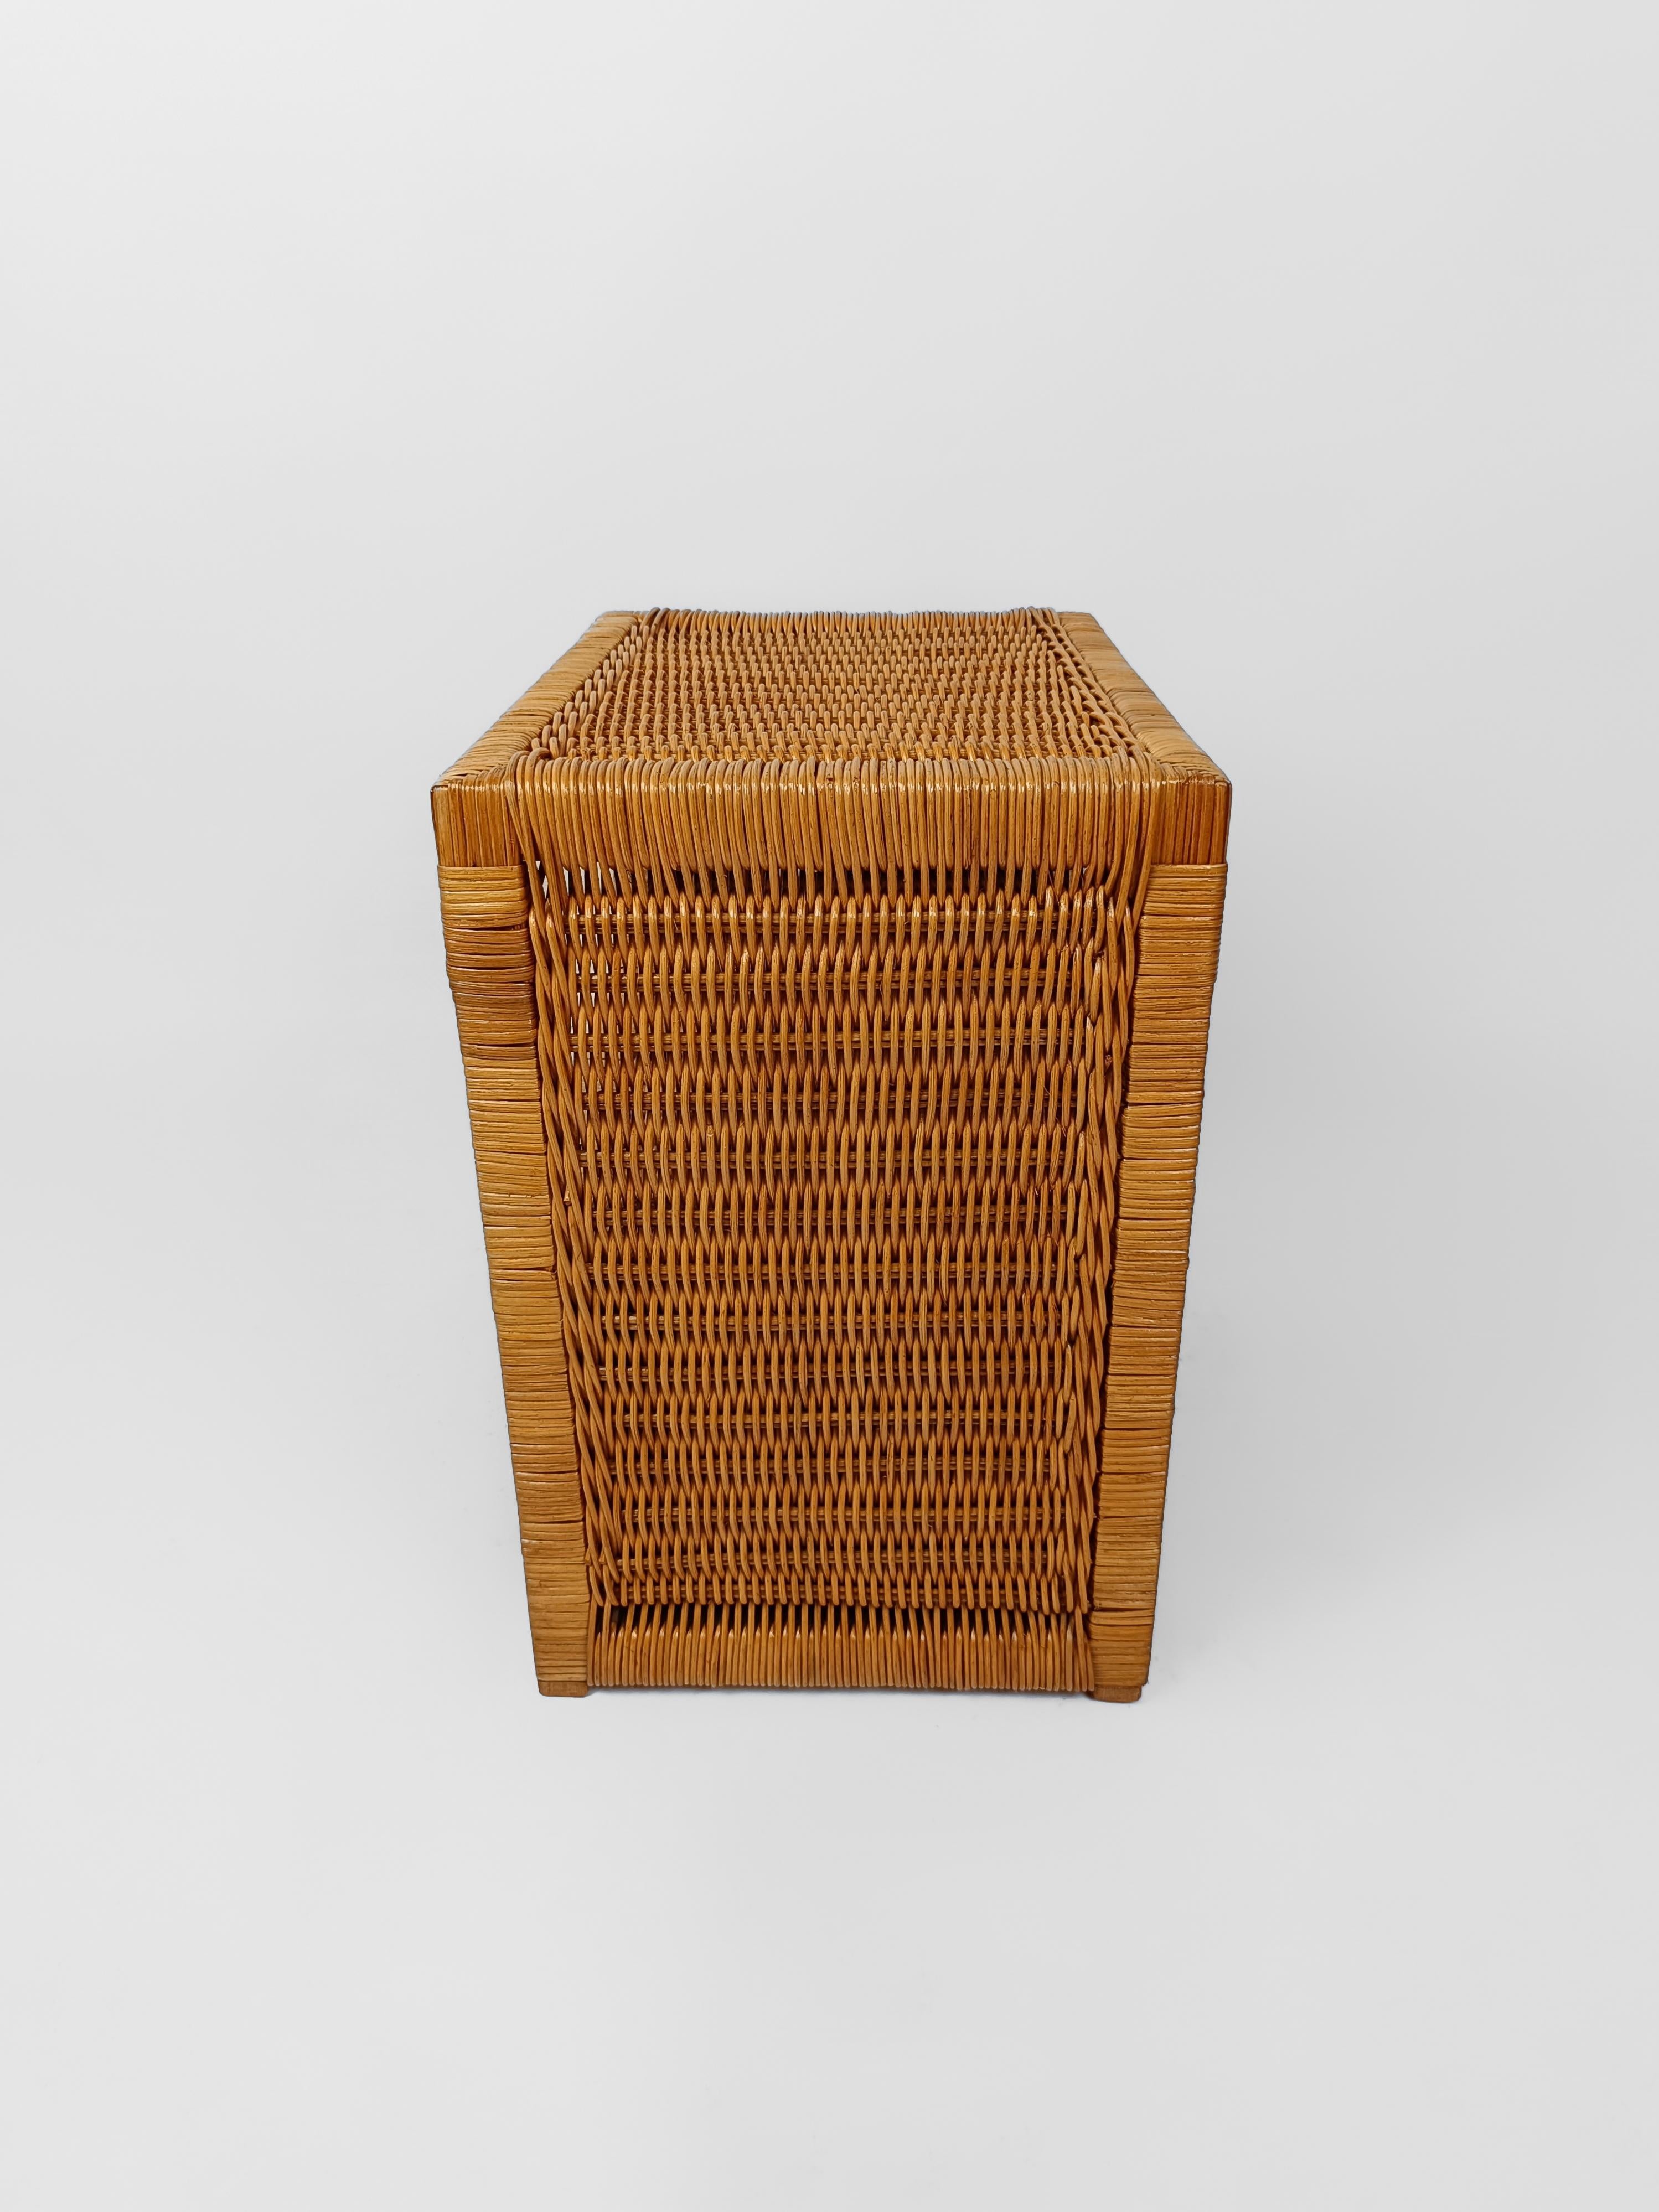 Pair of Woven Rattan and Wicker Nightstands / Bedside Tables, Italy 1970s 5